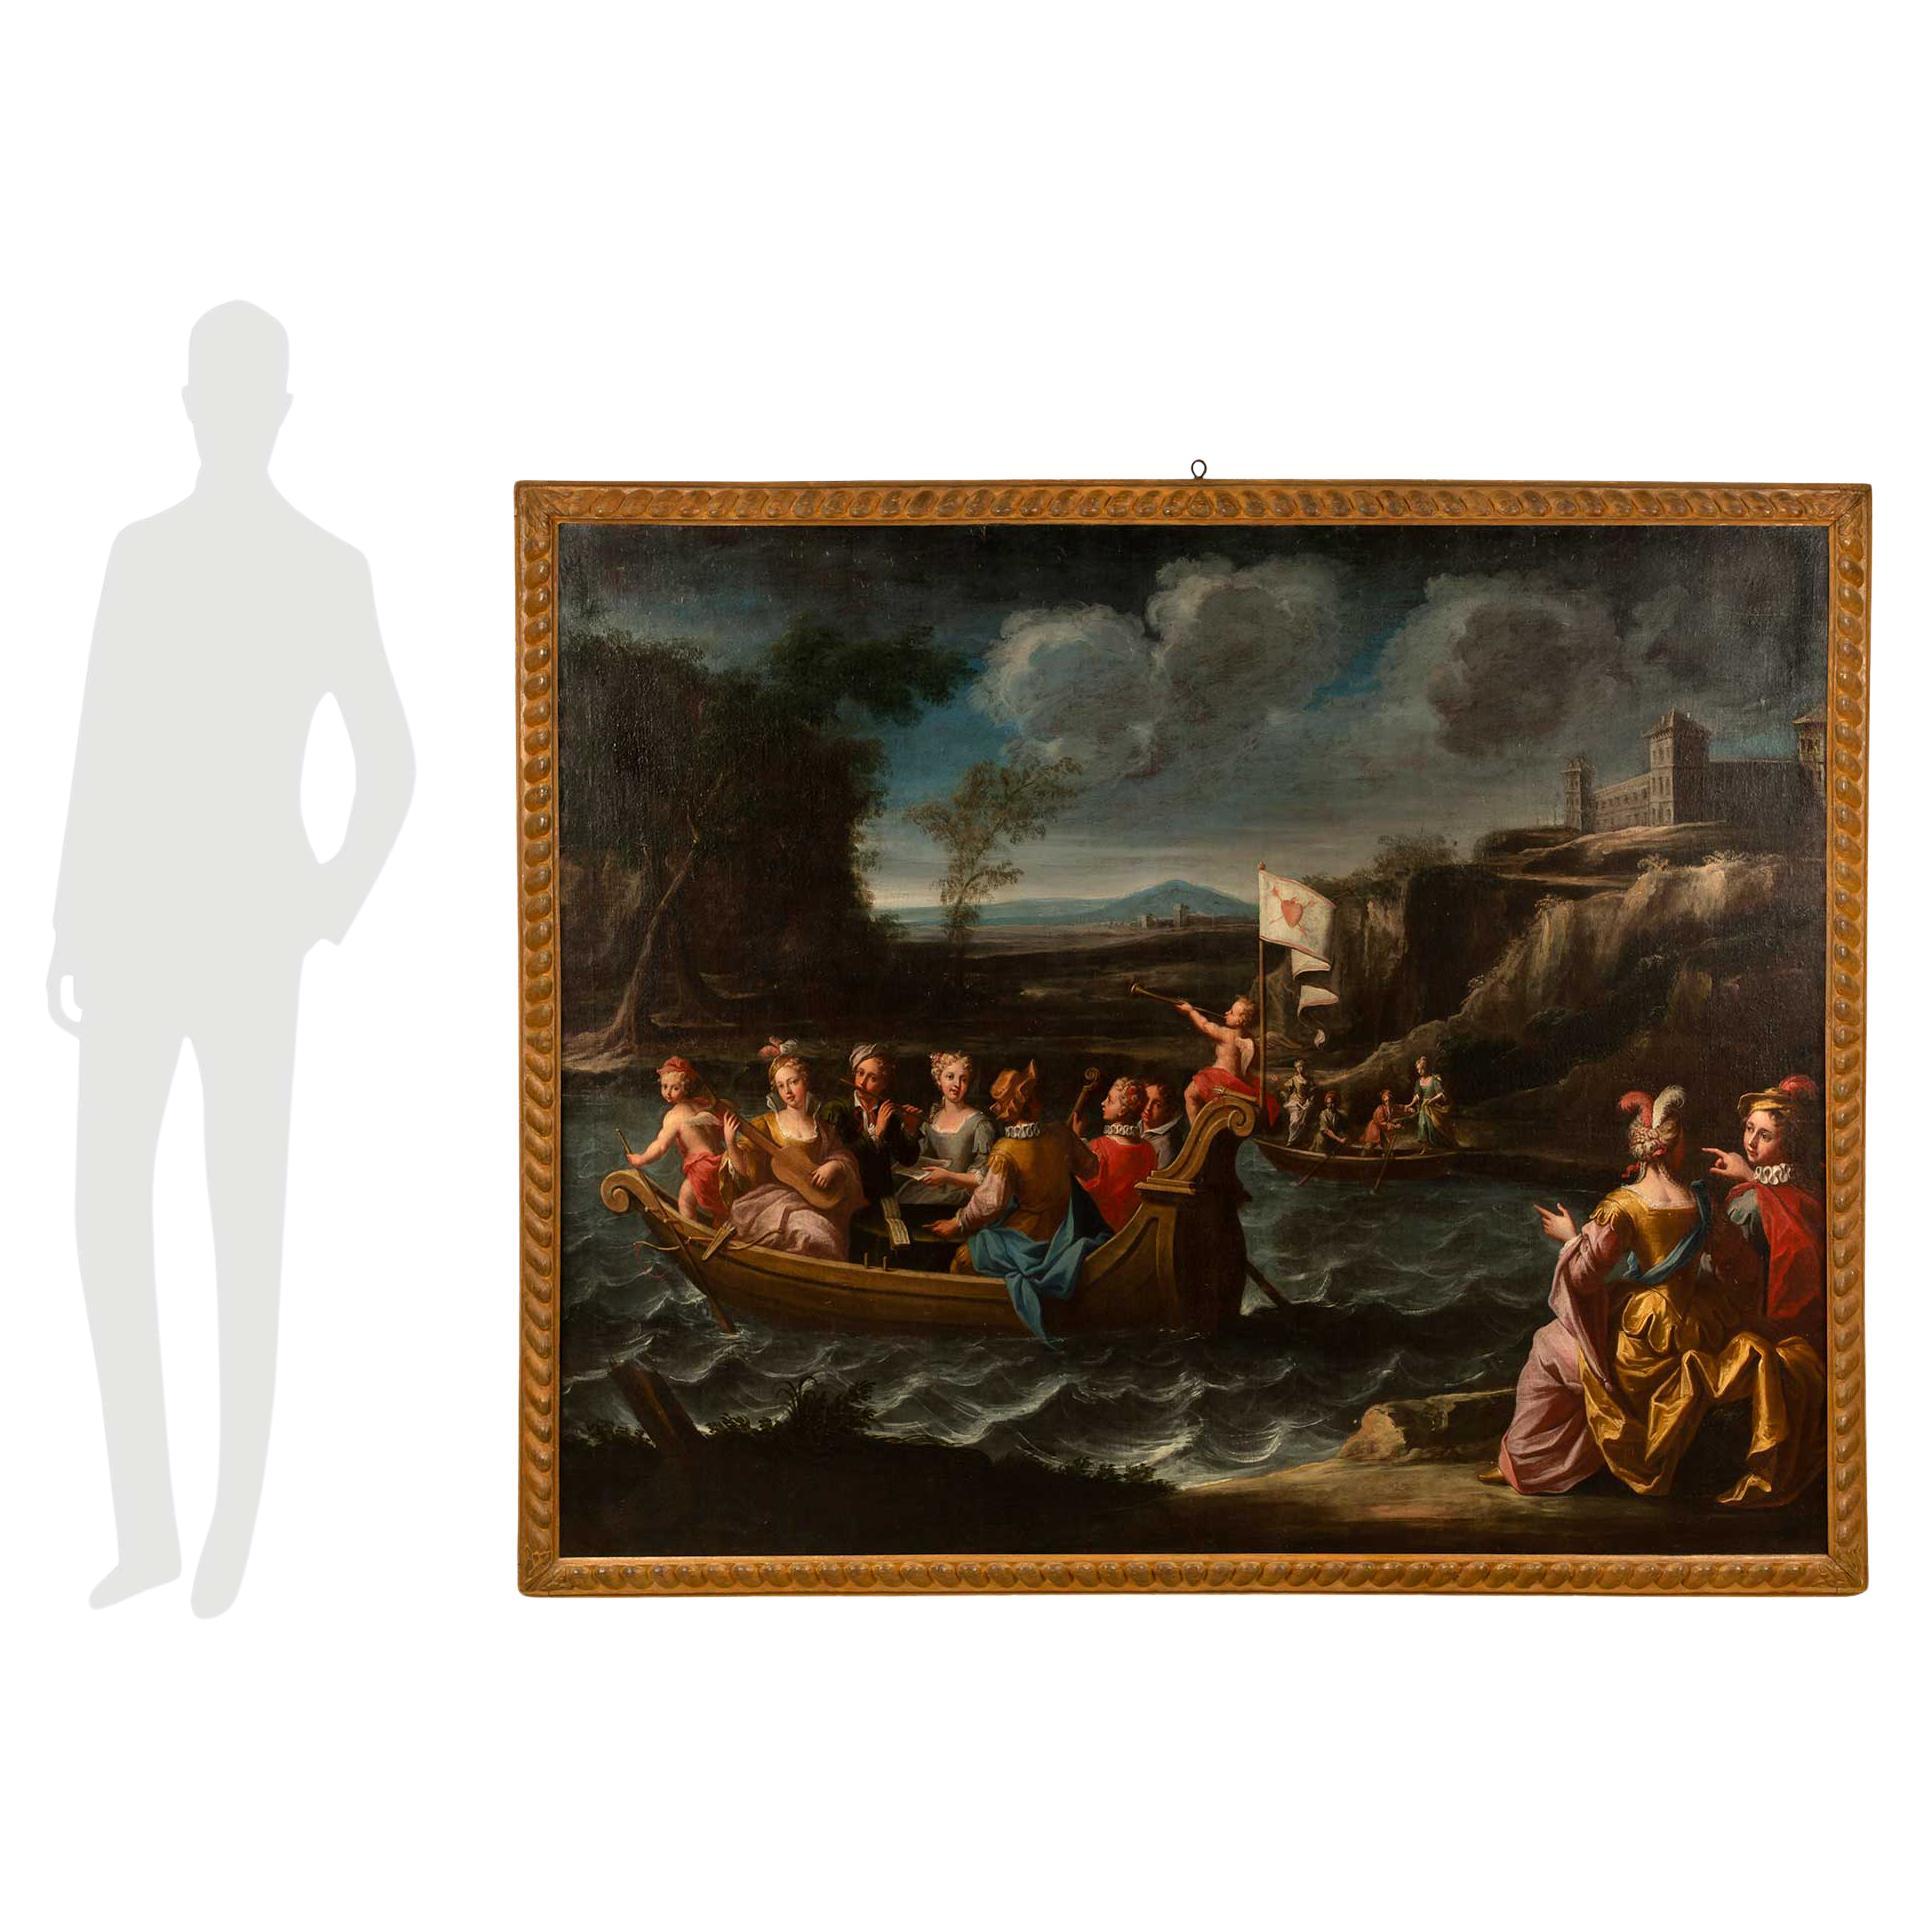 A sensational and large scale Italian 18th century oil on canvas from the Piedmont region. The beautiful painting is set in its original polychrome frame which displays a lovely carved beaded design. The wonderfully executed painting depicts